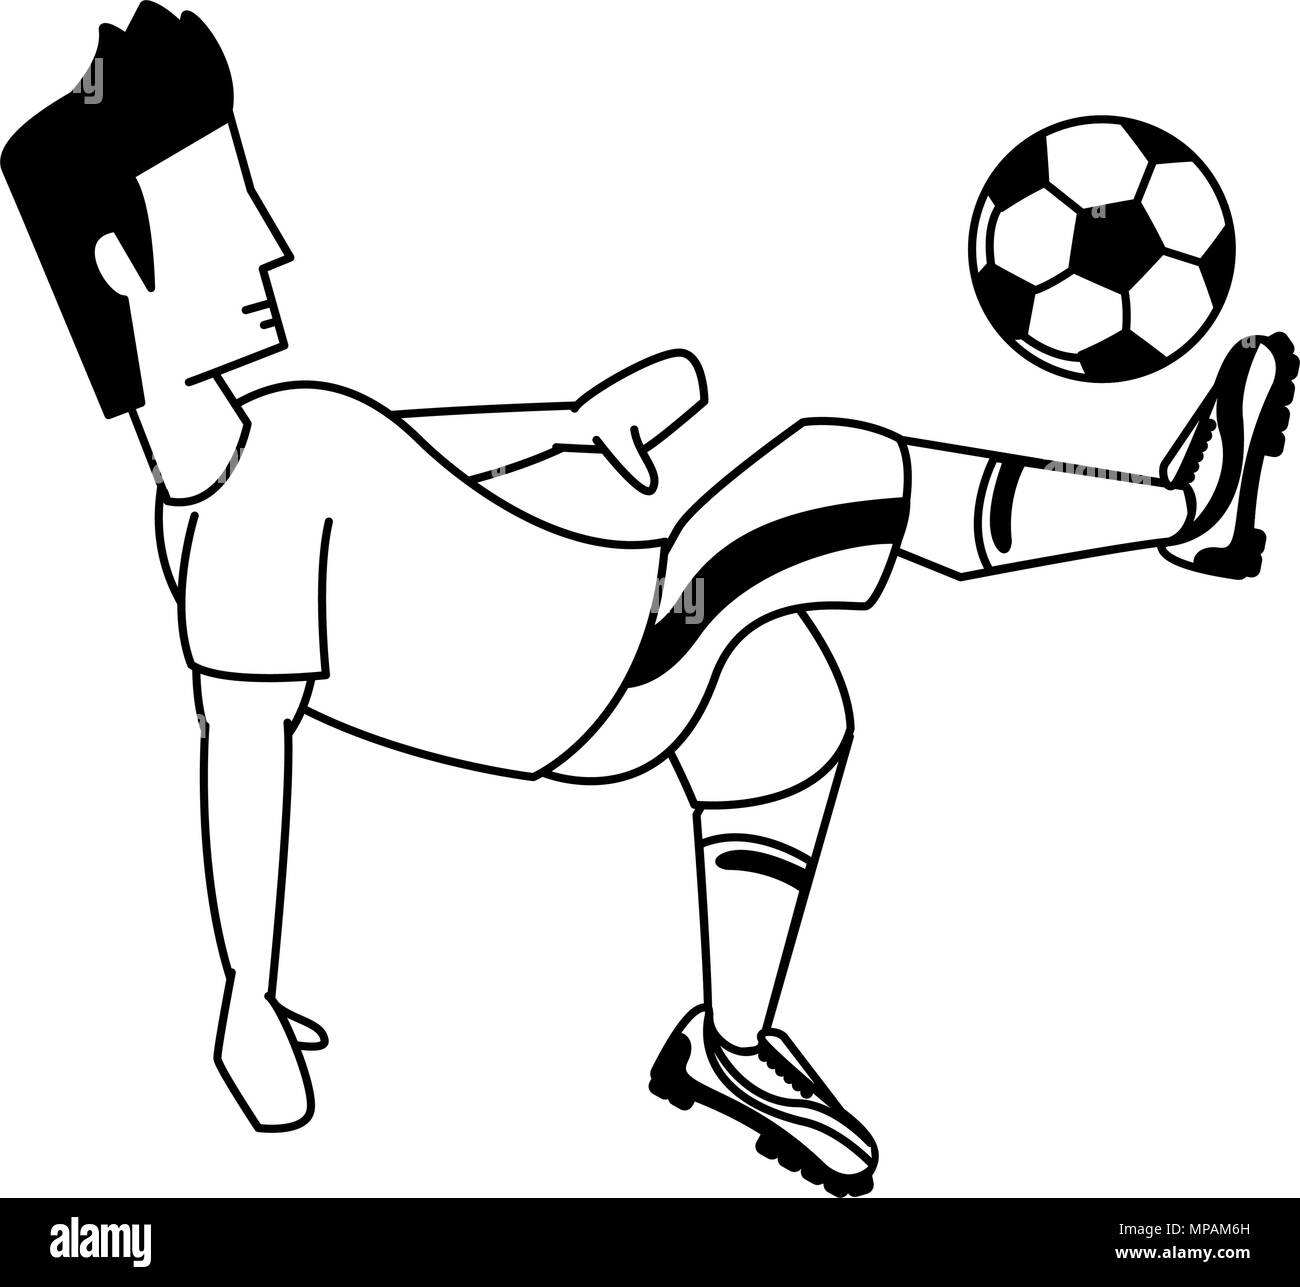 Soccer player cartoon in black and white colors Stock Vector Art ...